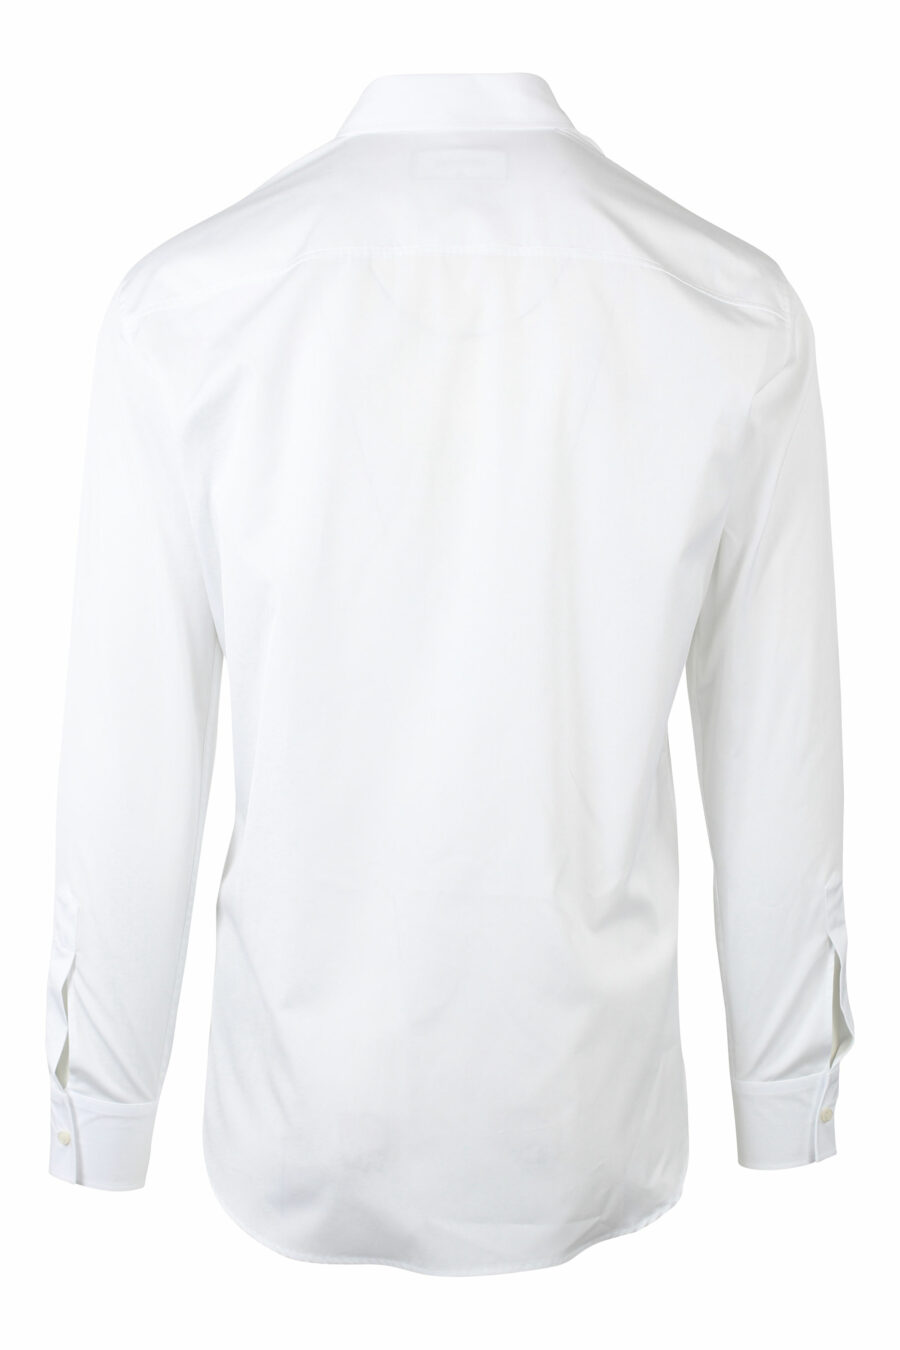 Chemise blanche avec double logo vertical "icon" - IMG 0785